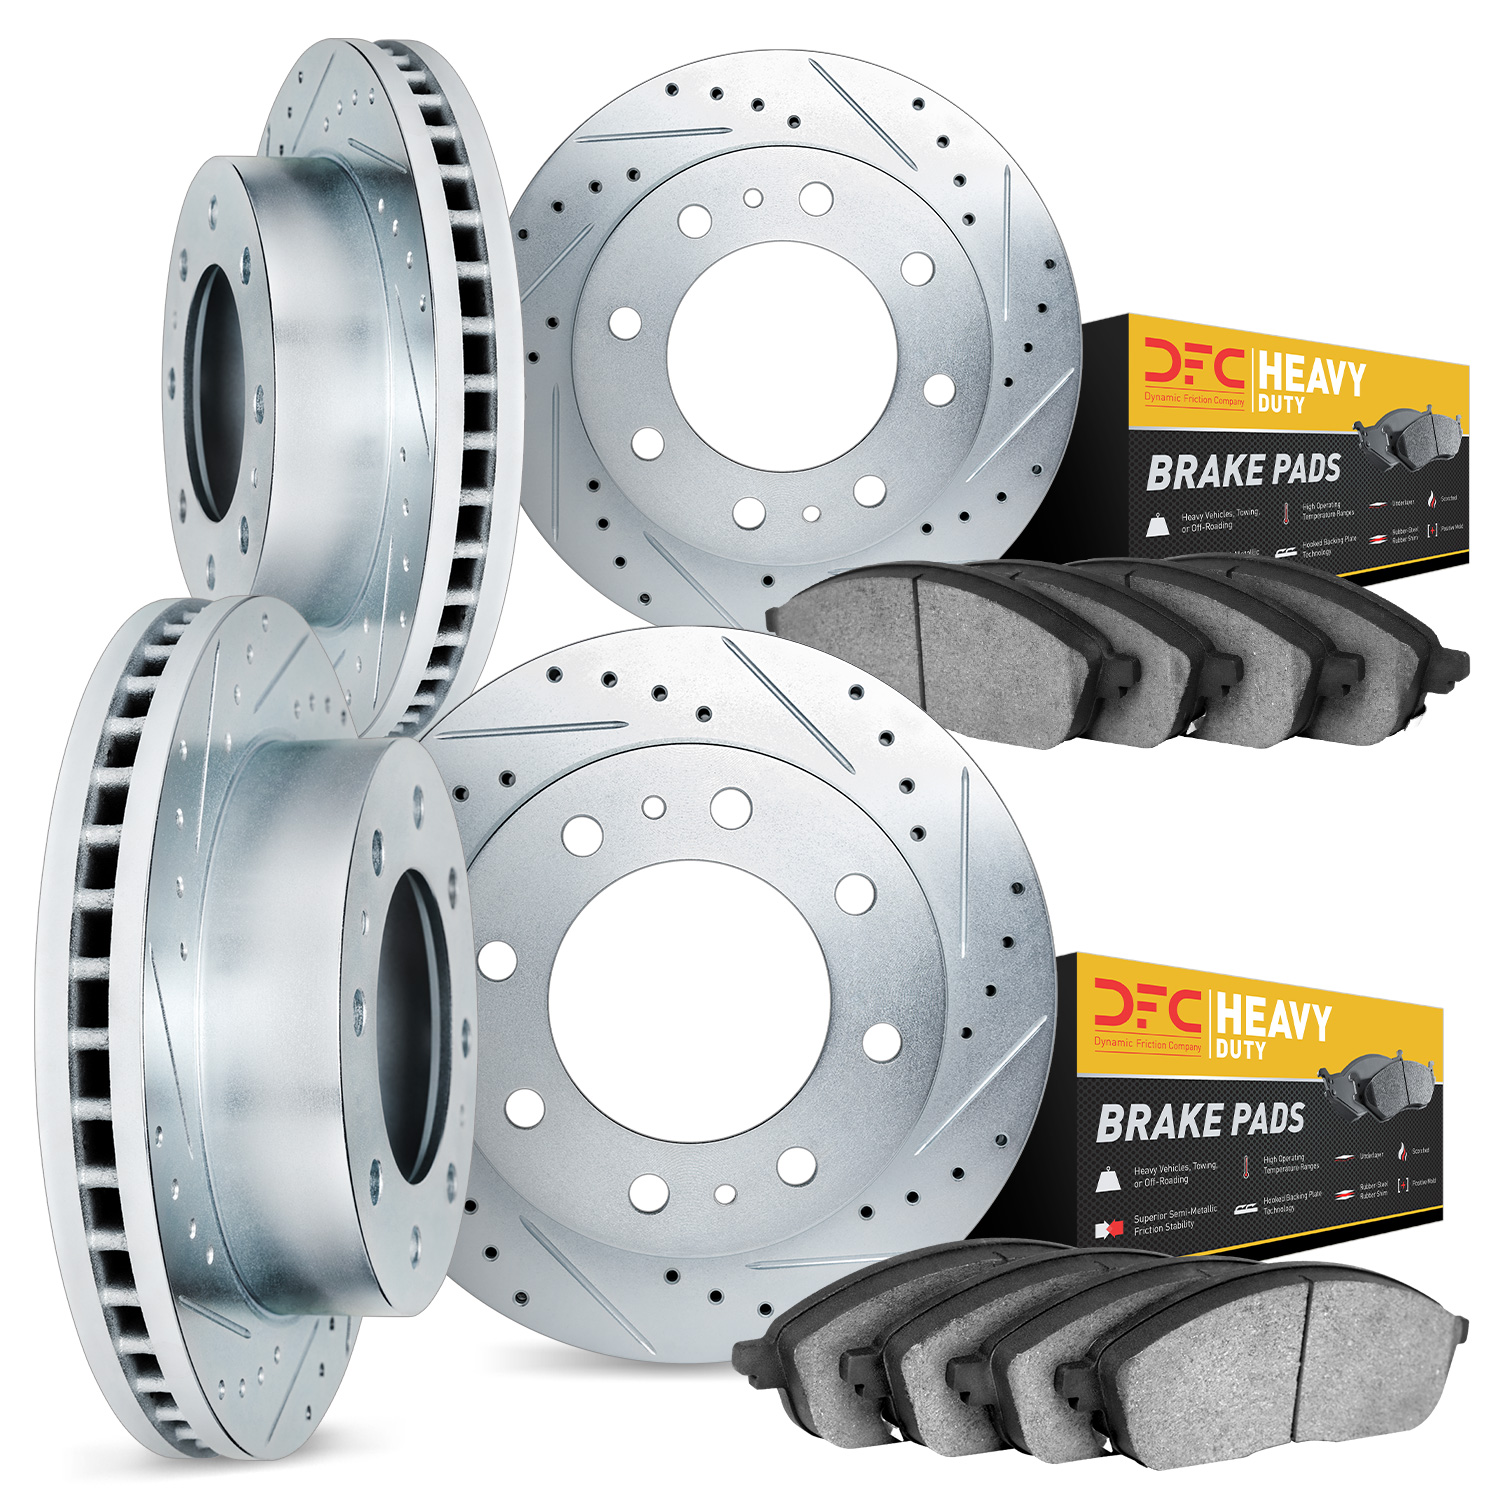 7204-99099 Drilled/Slotted Rotors w/Heavy-Duty Brake Pads Kit [Silver], 2006-2010 Ford/Lincoln/Mercury/Mazda, Position: Front an